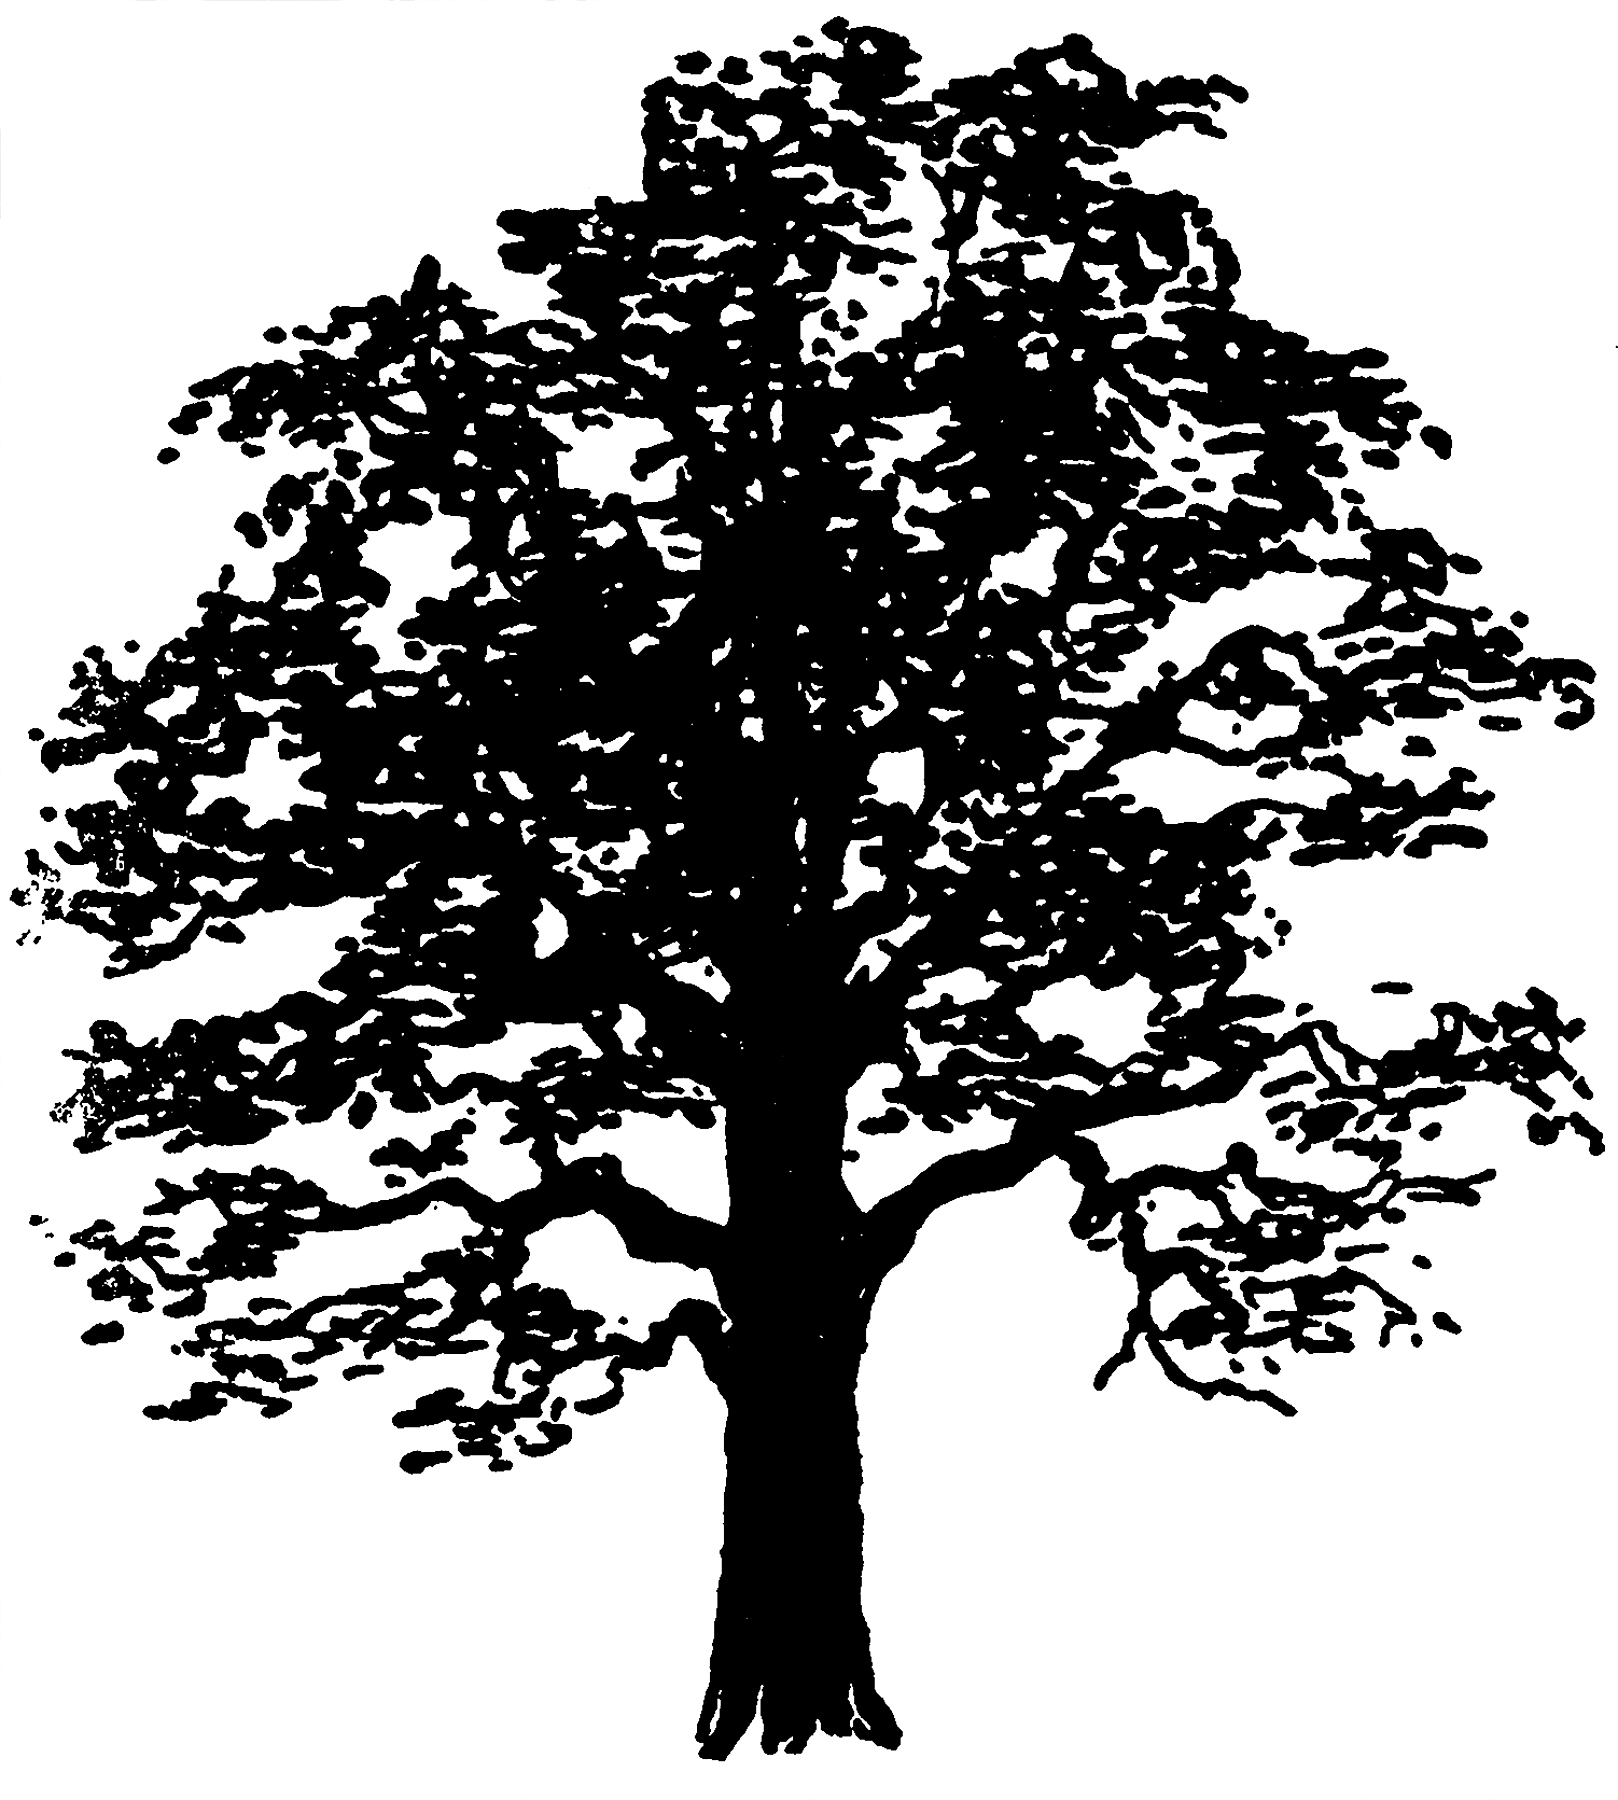 44 Tree Clipart - Trees Images Free! - The Graphics Fairy